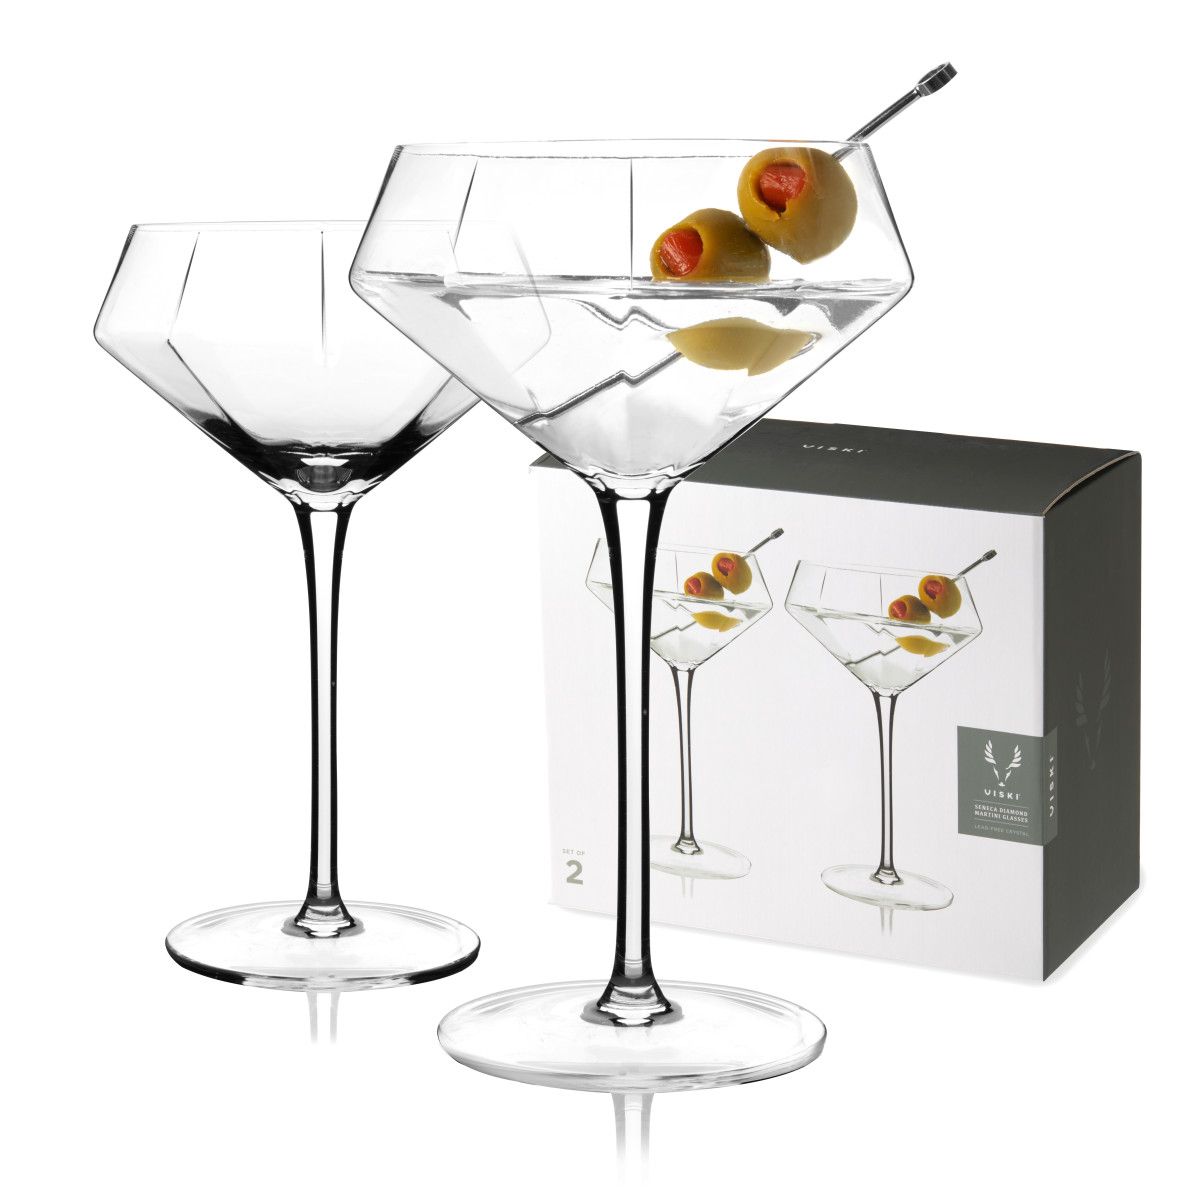 Champagne Coupe Glass (Set of 2 - 11oz)